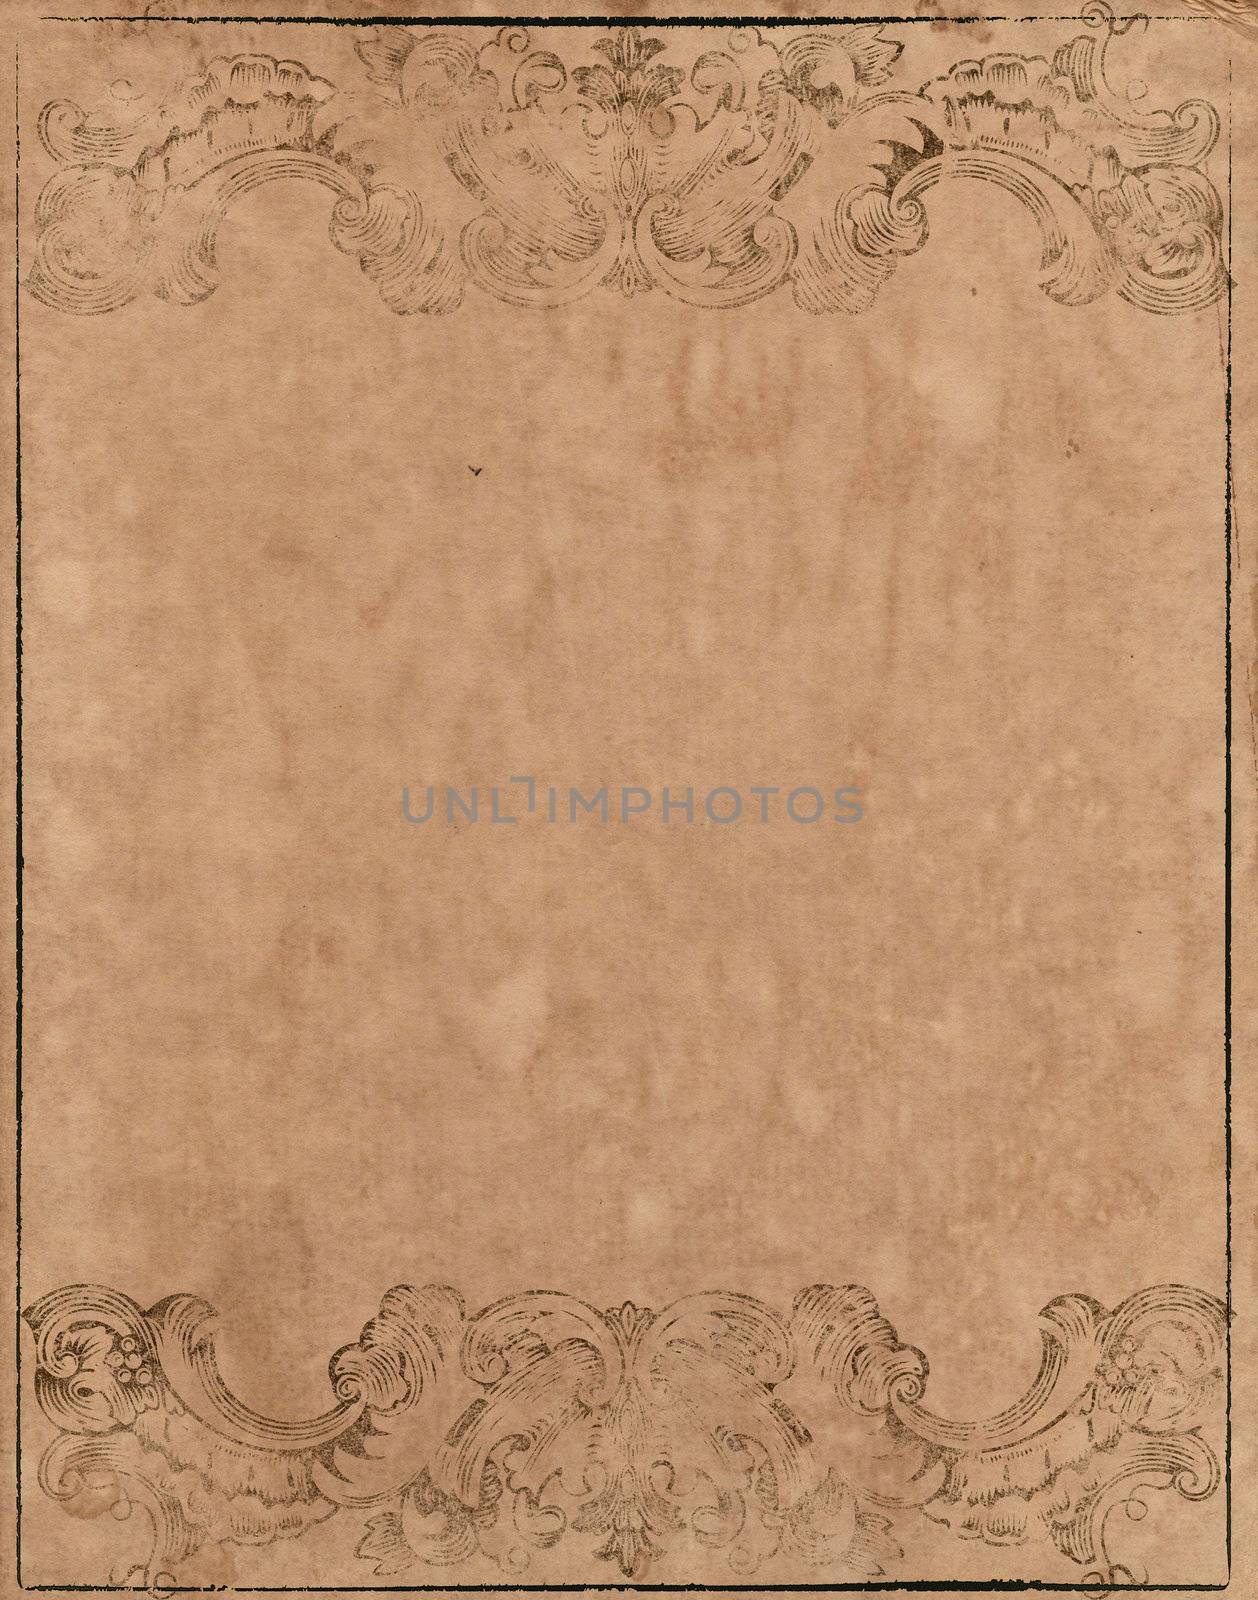 old grunge paper background with vintage victorian style 